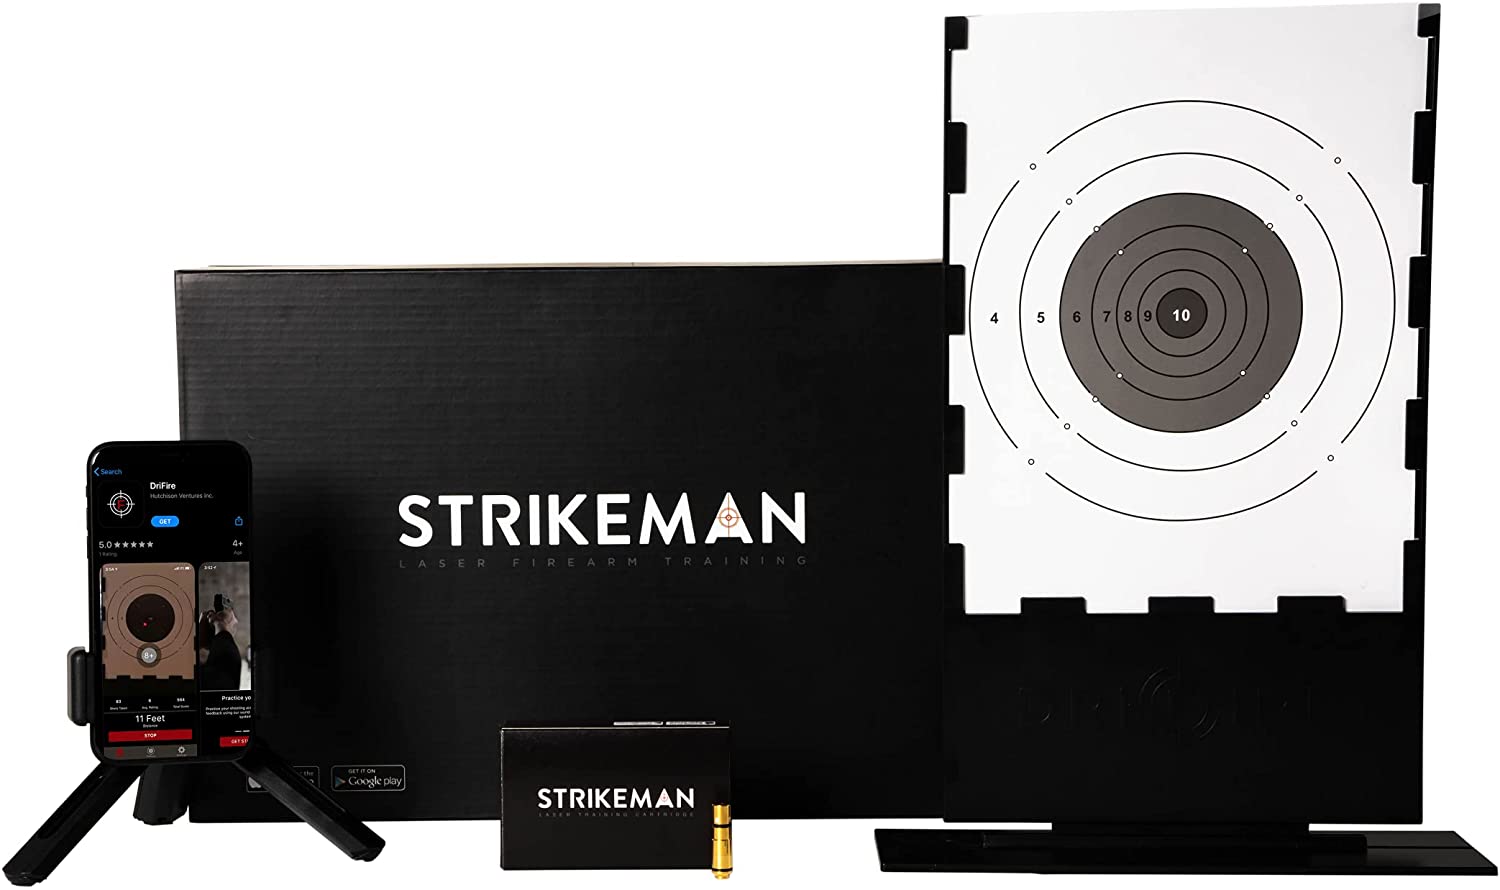 Strikeman - Dry Fire Training Kit with .30-06 Springfield Ammo Bullet & Downloadable App